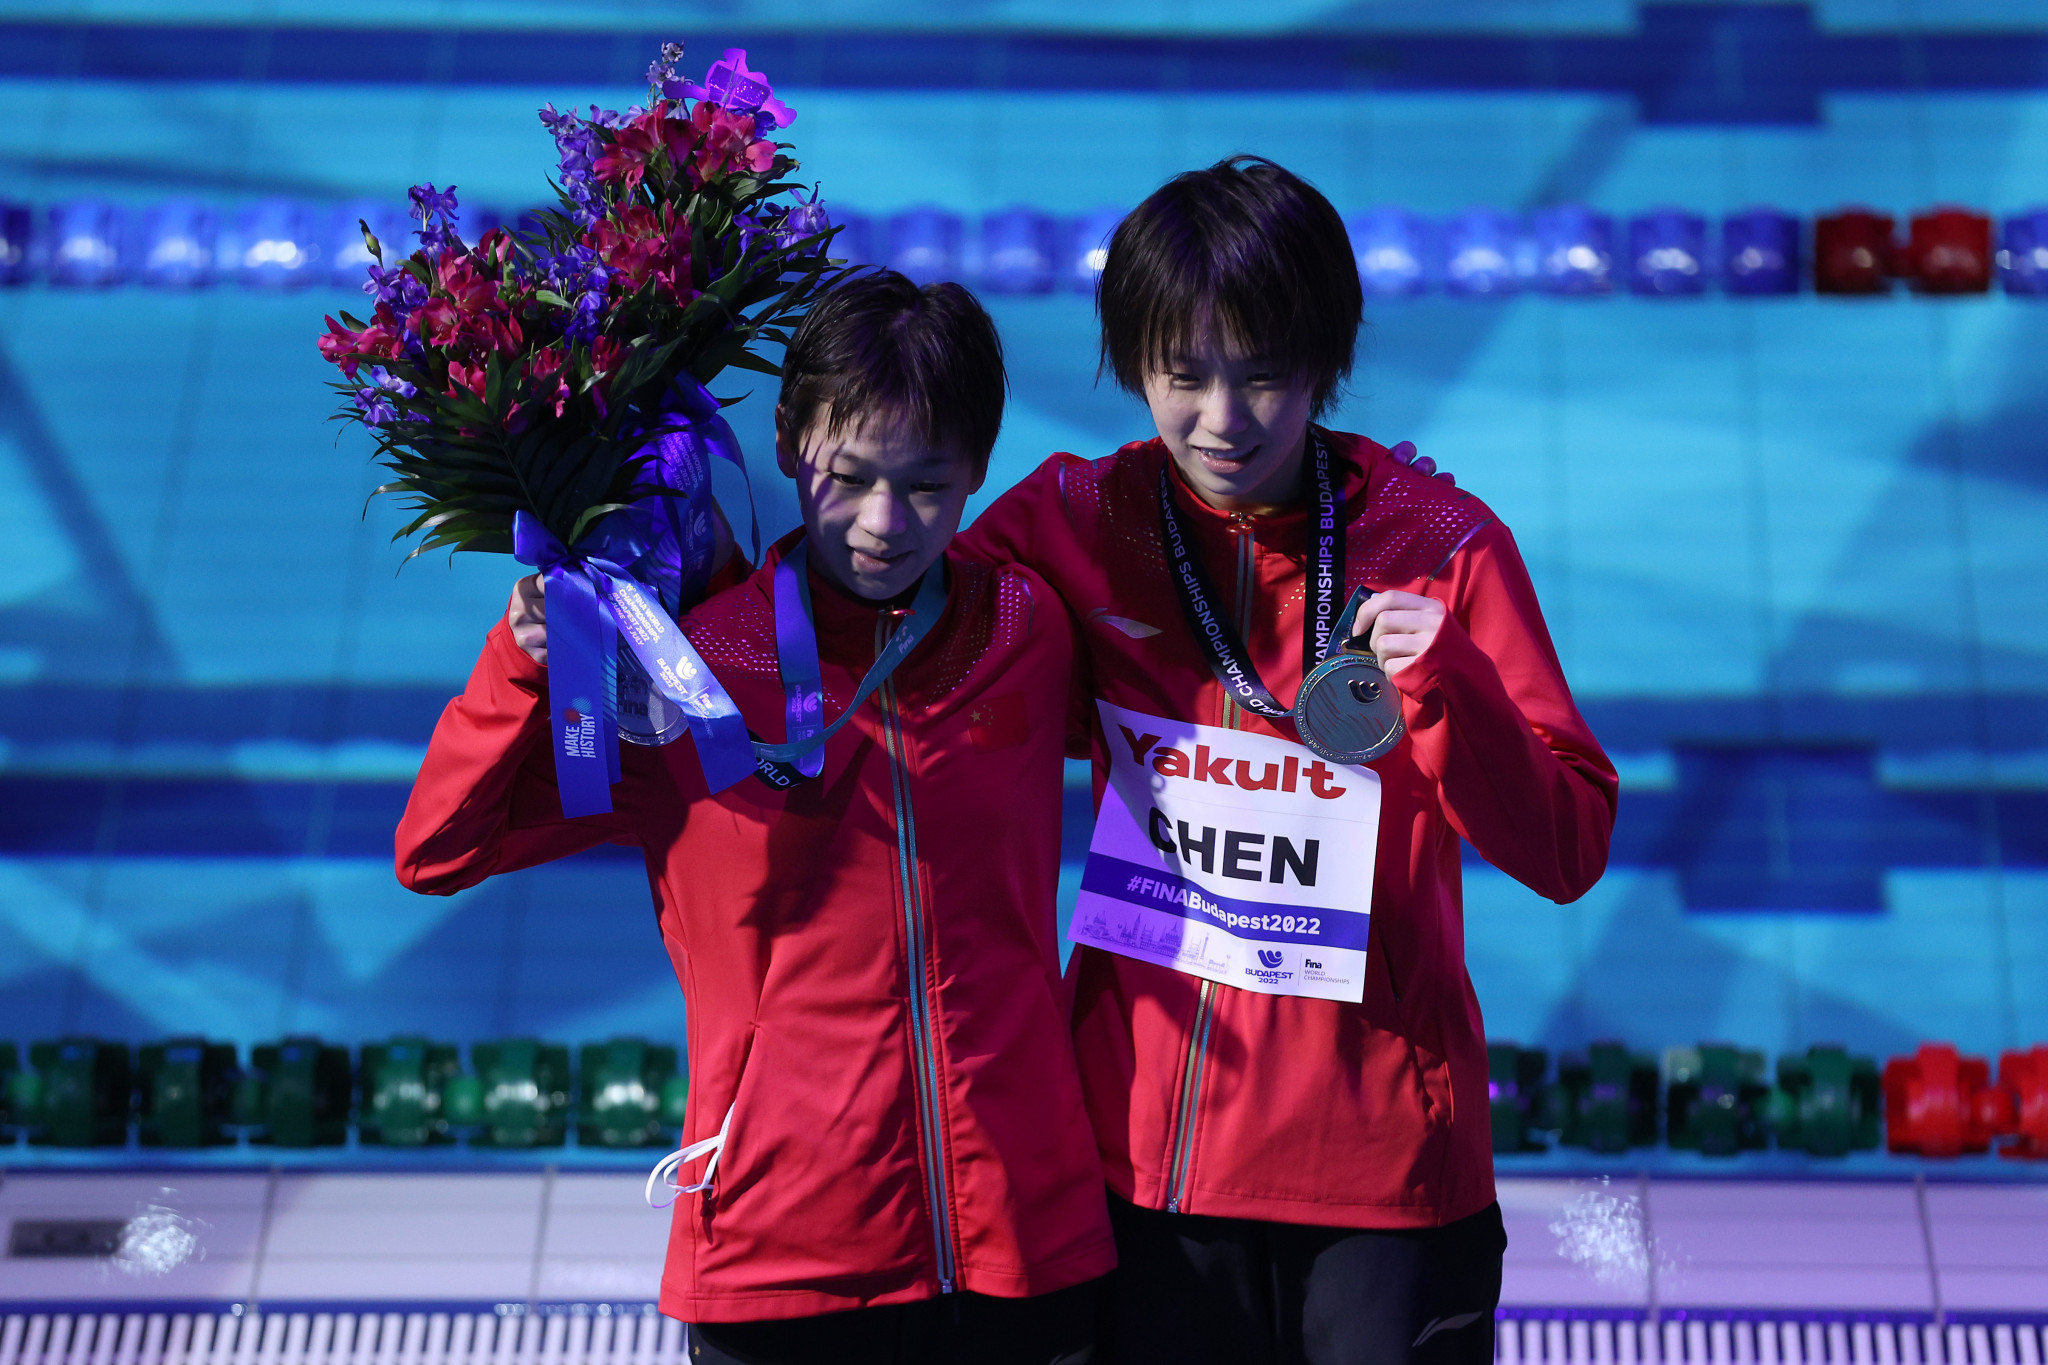 Chen holds off Olympic champion Quan to take women's 10m diving gold at FINA World Championships